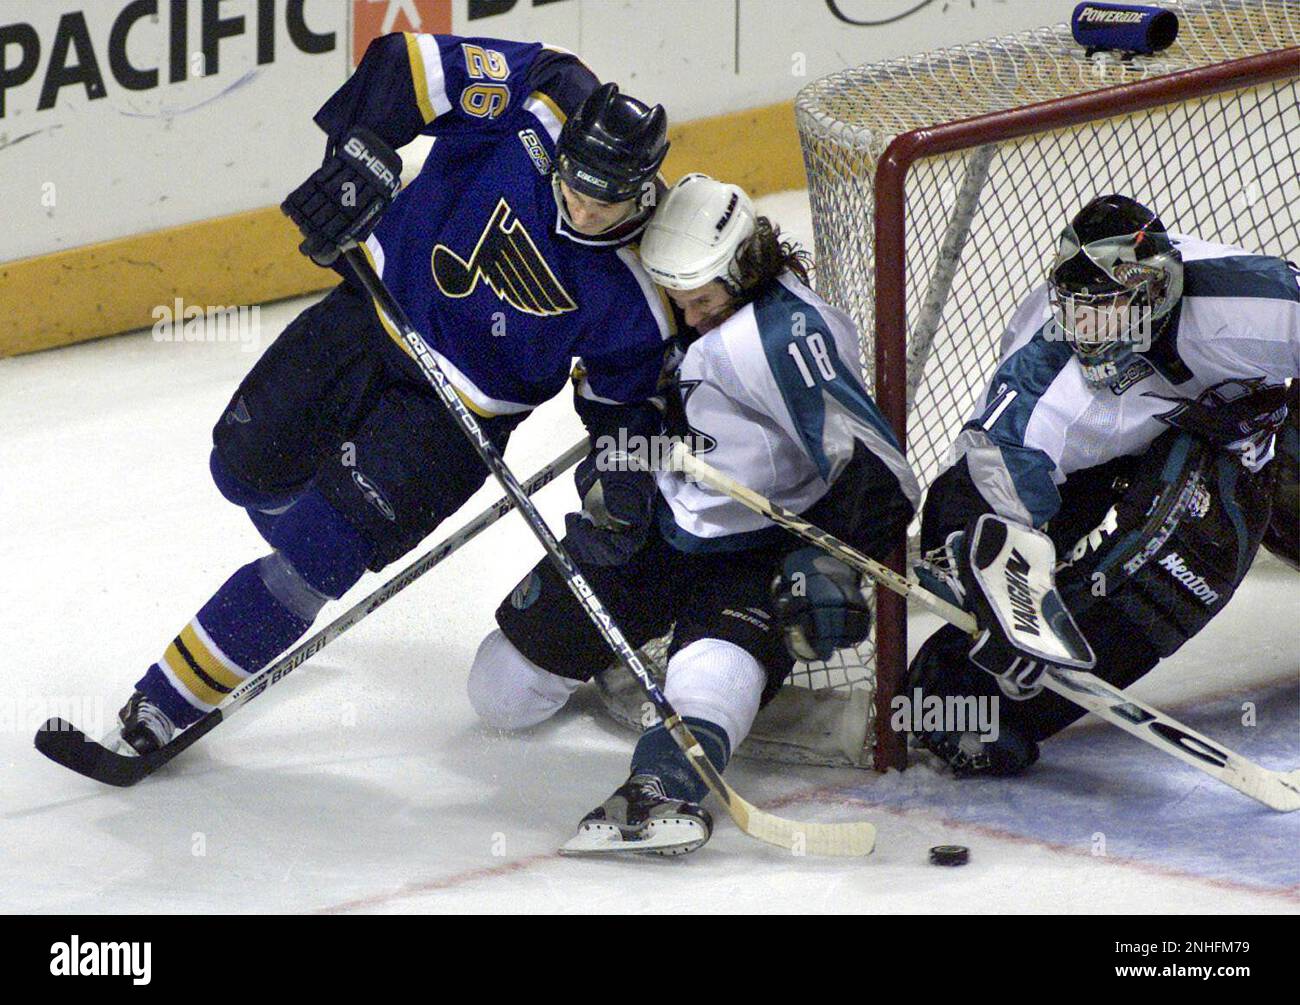 SHARKS RICCI-C-02MAY00-SP-MAC --- Sharks' Mike Ricci scores a goal in the  second period of play to even the score 1-1. San Jose Sharks v. Dallas  Stars. Game 3 of the Semi-Final Playoffs.